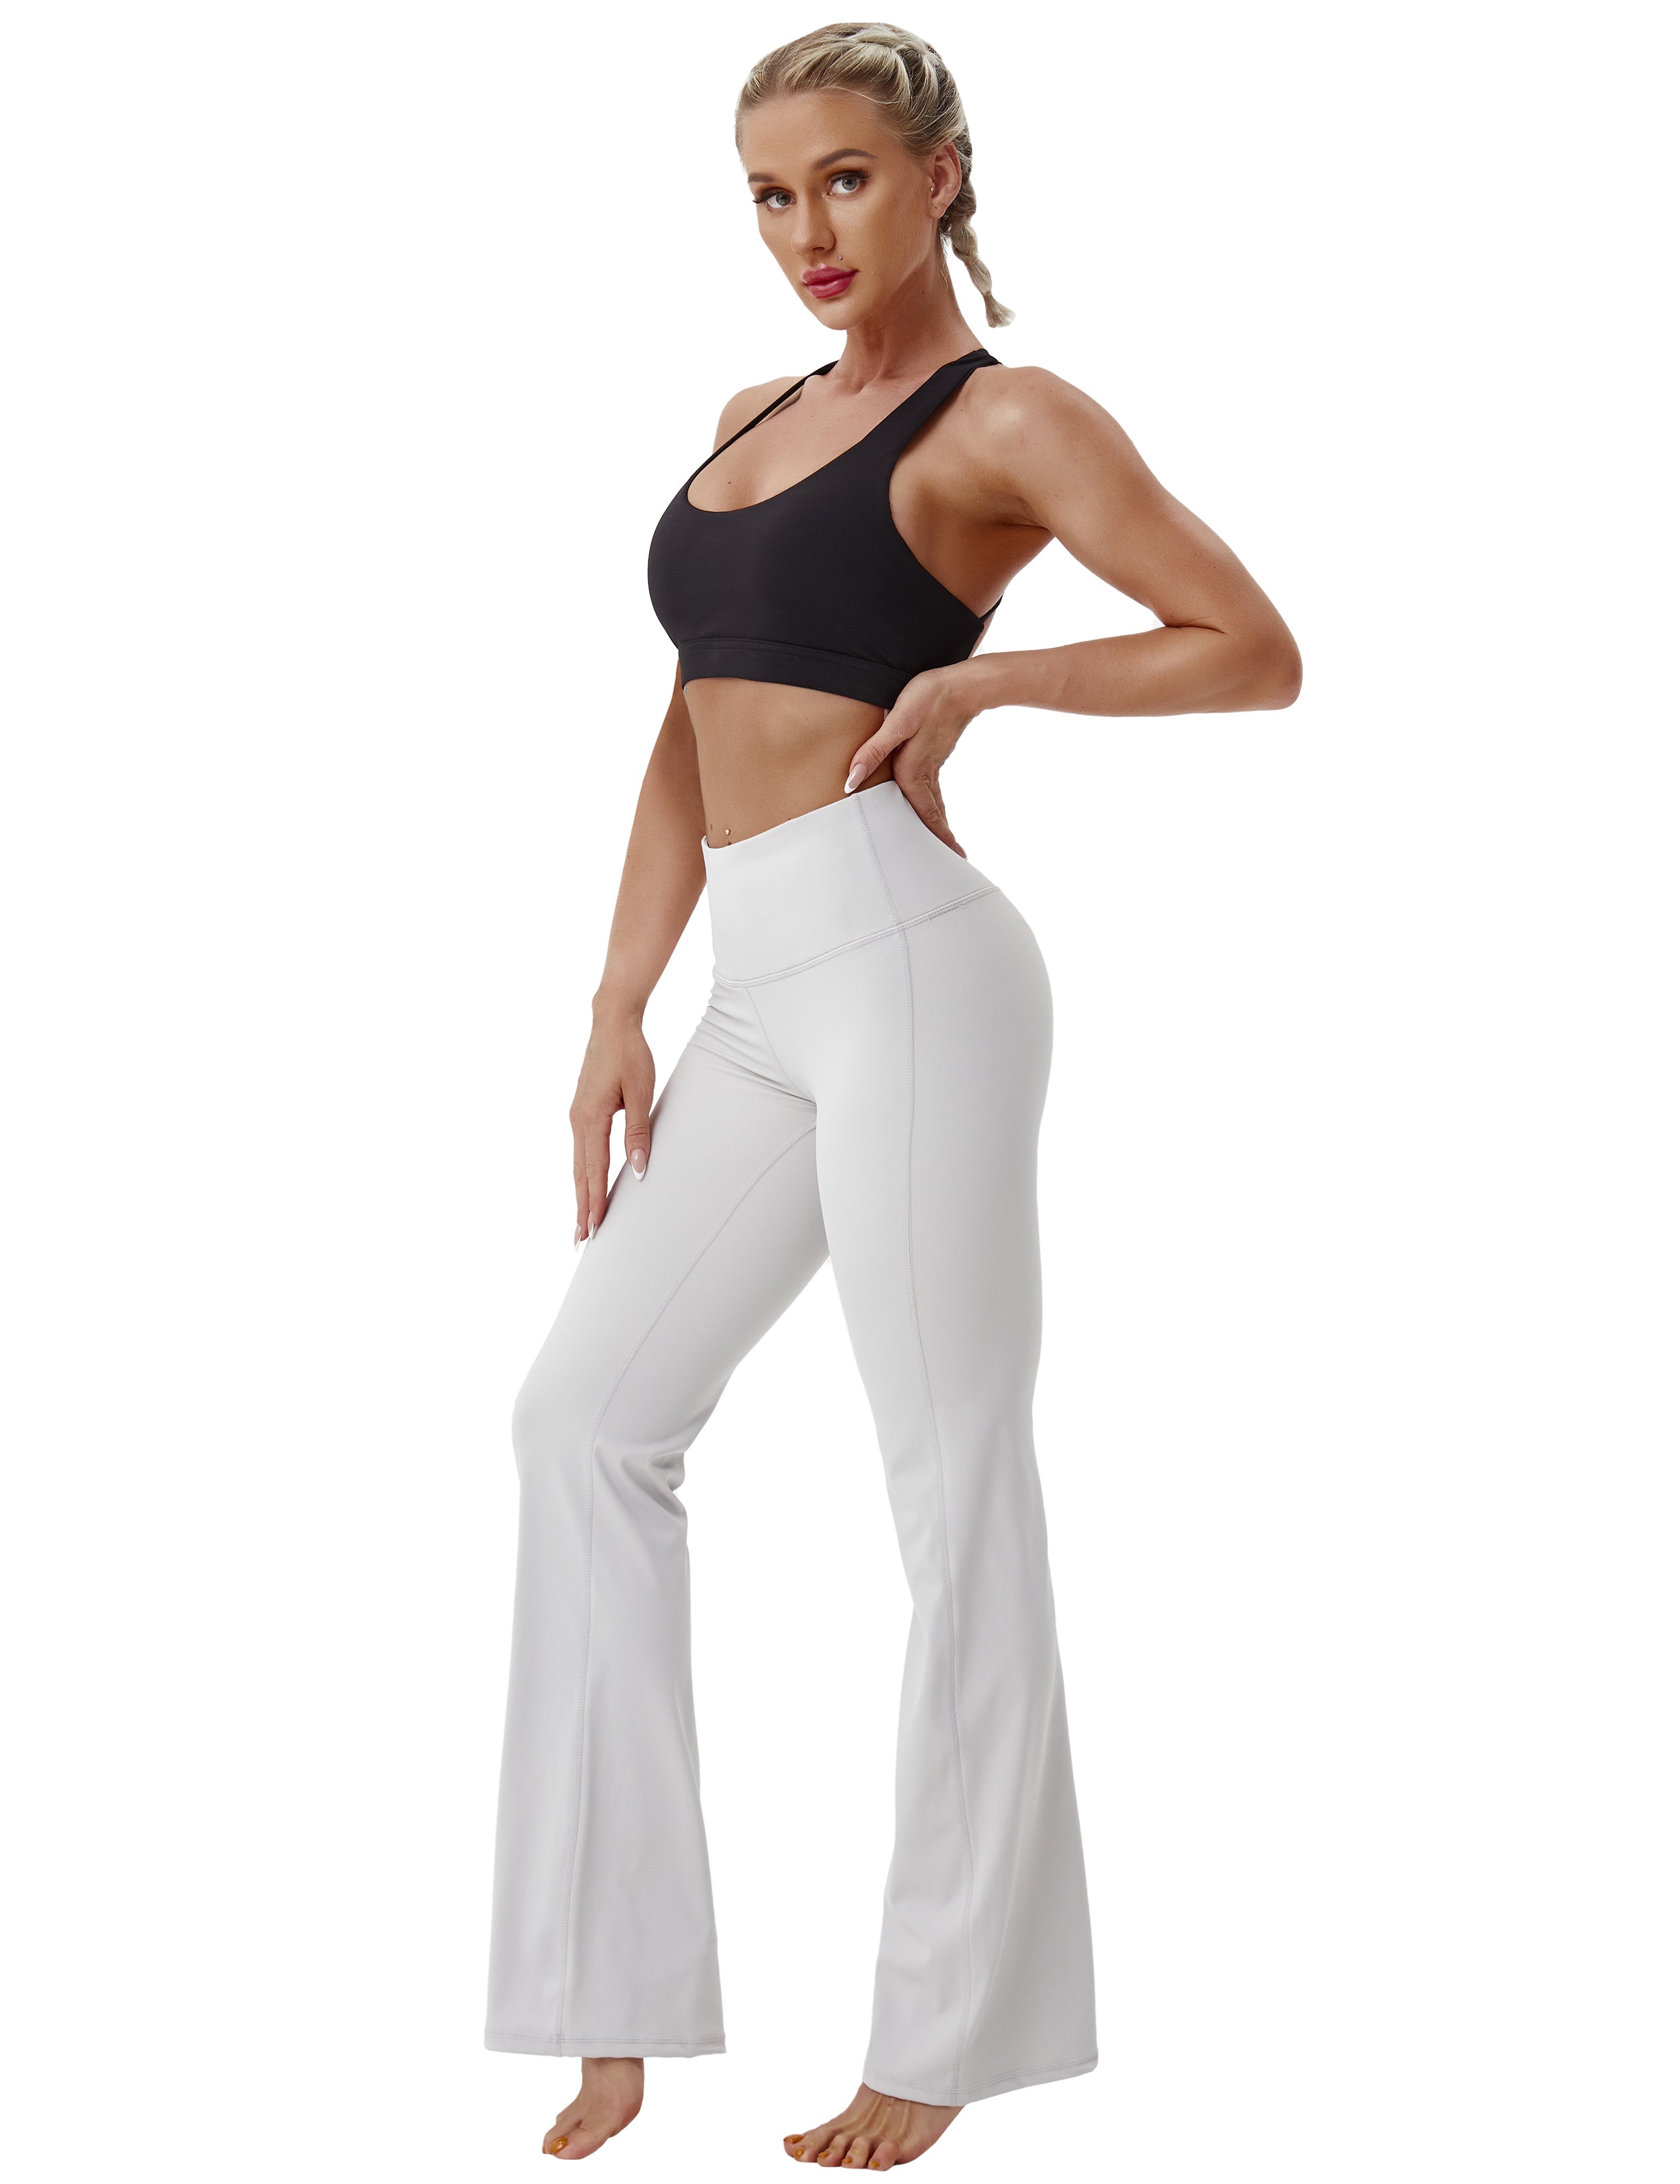 High Waist Bootcut Leggings Lightgray 75%Nylon/25%Spandex Fabric doesn't attract lint easily 4-way stretch No see-through Moisture-wicking Tummy control Inner pocket Five lengths